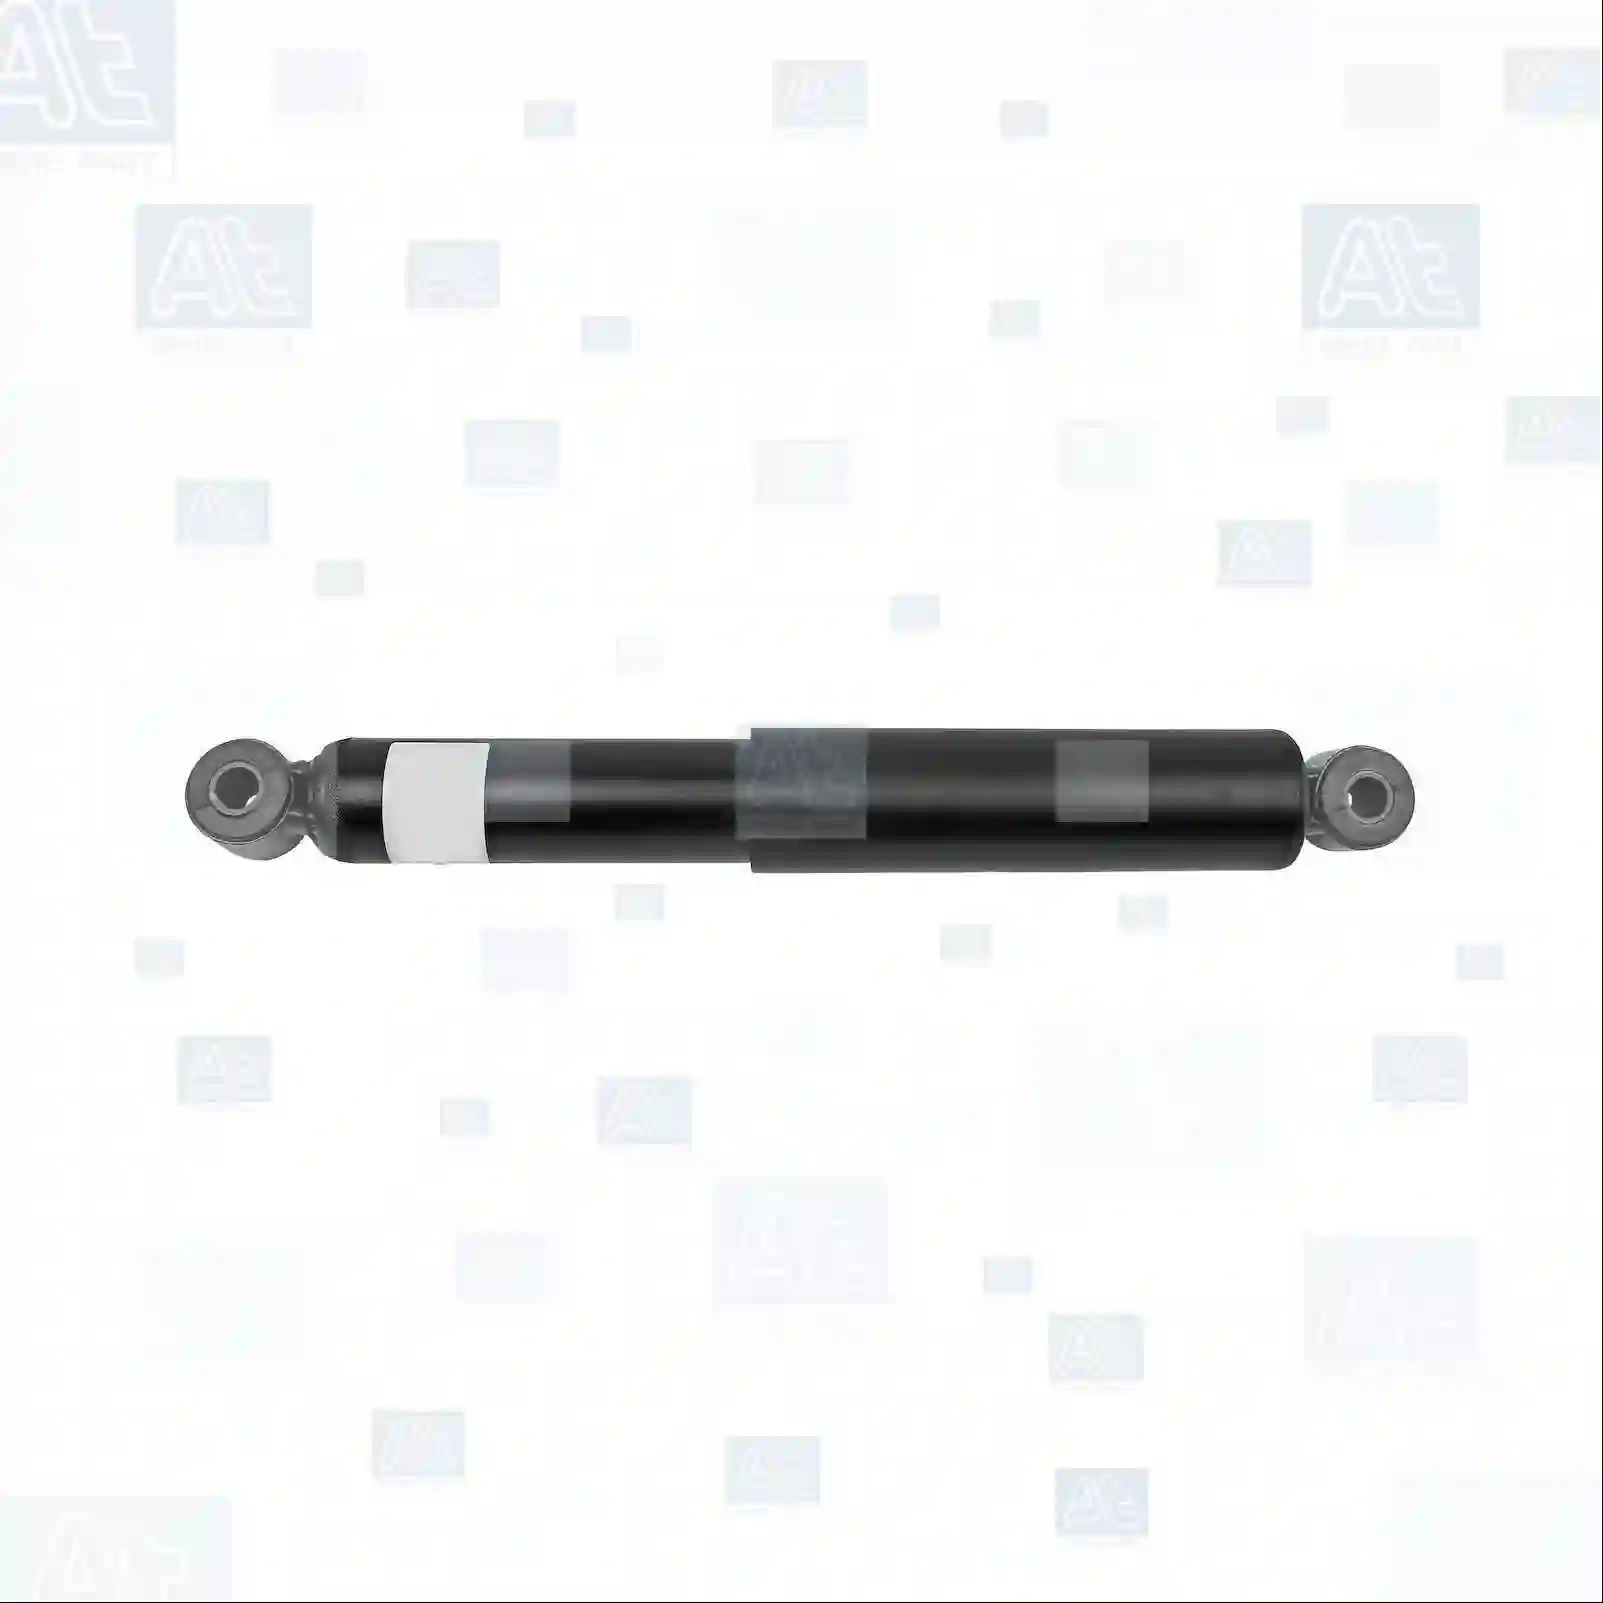 Shock absorber, 77728106, 04726933, 04750776, 04829308, 04829310, 08563333, 08565060, 08566311, 08566312, 08568999, 08569000, 04750776, 08563333, 08566312, 04726933, 04750776, 04817912, 04829308, 04829310, 08555803, 08559478, 08559985, 08561470, 08562478, 08563236, 08563333, 08565060, 08566311, 08566312, 08568999, 08569000, 08585538, 4726933, 4750776, 4829308, 4829310, 8563333, 8566311, 8566312, 8568999, 8569000 ||  77728106 At Spare Part | Engine, Accelerator Pedal, Camshaft, Connecting Rod, Crankcase, Crankshaft, Cylinder Head, Engine Suspension Mountings, Exhaust Manifold, Exhaust Gas Recirculation, Filter Kits, Flywheel Housing, General Overhaul Kits, Engine, Intake Manifold, Oil Cleaner, Oil Cooler, Oil Filter, Oil Pump, Oil Sump, Piston & Liner, Sensor & Switch, Timing Case, Turbocharger, Cooling System, Belt Tensioner, Coolant Filter, Coolant Pipe, Corrosion Prevention Agent, Drive, Expansion Tank, Fan, Intercooler, Monitors & Gauges, Radiator, Thermostat, V-Belt / Timing belt, Water Pump, Fuel System, Electronical Injector Unit, Feed Pump, Fuel Filter, cpl., Fuel Gauge Sender,  Fuel Line, Fuel Pump, Fuel Tank, Injection Line Kit, Injection Pump, Exhaust System, Clutch & Pedal, Gearbox, Propeller Shaft, Axles, Brake System, Hubs & Wheels, Suspension, Leaf Spring, Universal Parts / Accessories, Steering, Electrical System, Cabin Shock absorber, 77728106, 04726933, 04750776, 04829308, 04829310, 08563333, 08565060, 08566311, 08566312, 08568999, 08569000, 04750776, 08563333, 08566312, 04726933, 04750776, 04817912, 04829308, 04829310, 08555803, 08559478, 08559985, 08561470, 08562478, 08563236, 08563333, 08565060, 08566311, 08566312, 08568999, 08569000, 08585538, 4726933, 4750776, 4829308, 4829310, 8563333, 8566311, 8566312, 8568999, 8569000 ||  77728106 At Spare Part | Engine, Accelerator Pedal, Camshaft, Connecting Rod, Crankcase, Crankshaft, Cylinder Head, Engine Suspension Mountings, Exhaust Manifold, Exhaust Gas Recirculation, Filter Kits, Flywheel Housing, General Overhaul Kits, Engine, Intake Manifold, Oil Cleaner, Oil Cooler, Oil Filter, Oil Pump, Oil Sump, Piston & Liner, Sensor & Switch, Timing Case, Turbocharger, Cooling System, Belt Tensioner, Coolant Filter, Coolant Pipe, Corrosion Prevention Agent, Drive, Expansion Tank, Fan, Intercooler, Monitors & Gauges, Radiator, Thermostat, V-Belt / Timing belt, Water Pump, Fuel System, Electronical Injector Unit, Feed Pump, Fuel Filter, cpl., Fuel Gauge Sender,  Fuel Line, Fuel Pump, Fuel Tank, Injection Line Kit, Injection Pump, Exhaust System, Clutch & Pedal, Gearbox, Propeller Shaft, Axles, Brake System, Hubs & Wheels, Suspension, Leaf Spring, Universal Parts / Accessories, Steering, Electrical System, Cabin